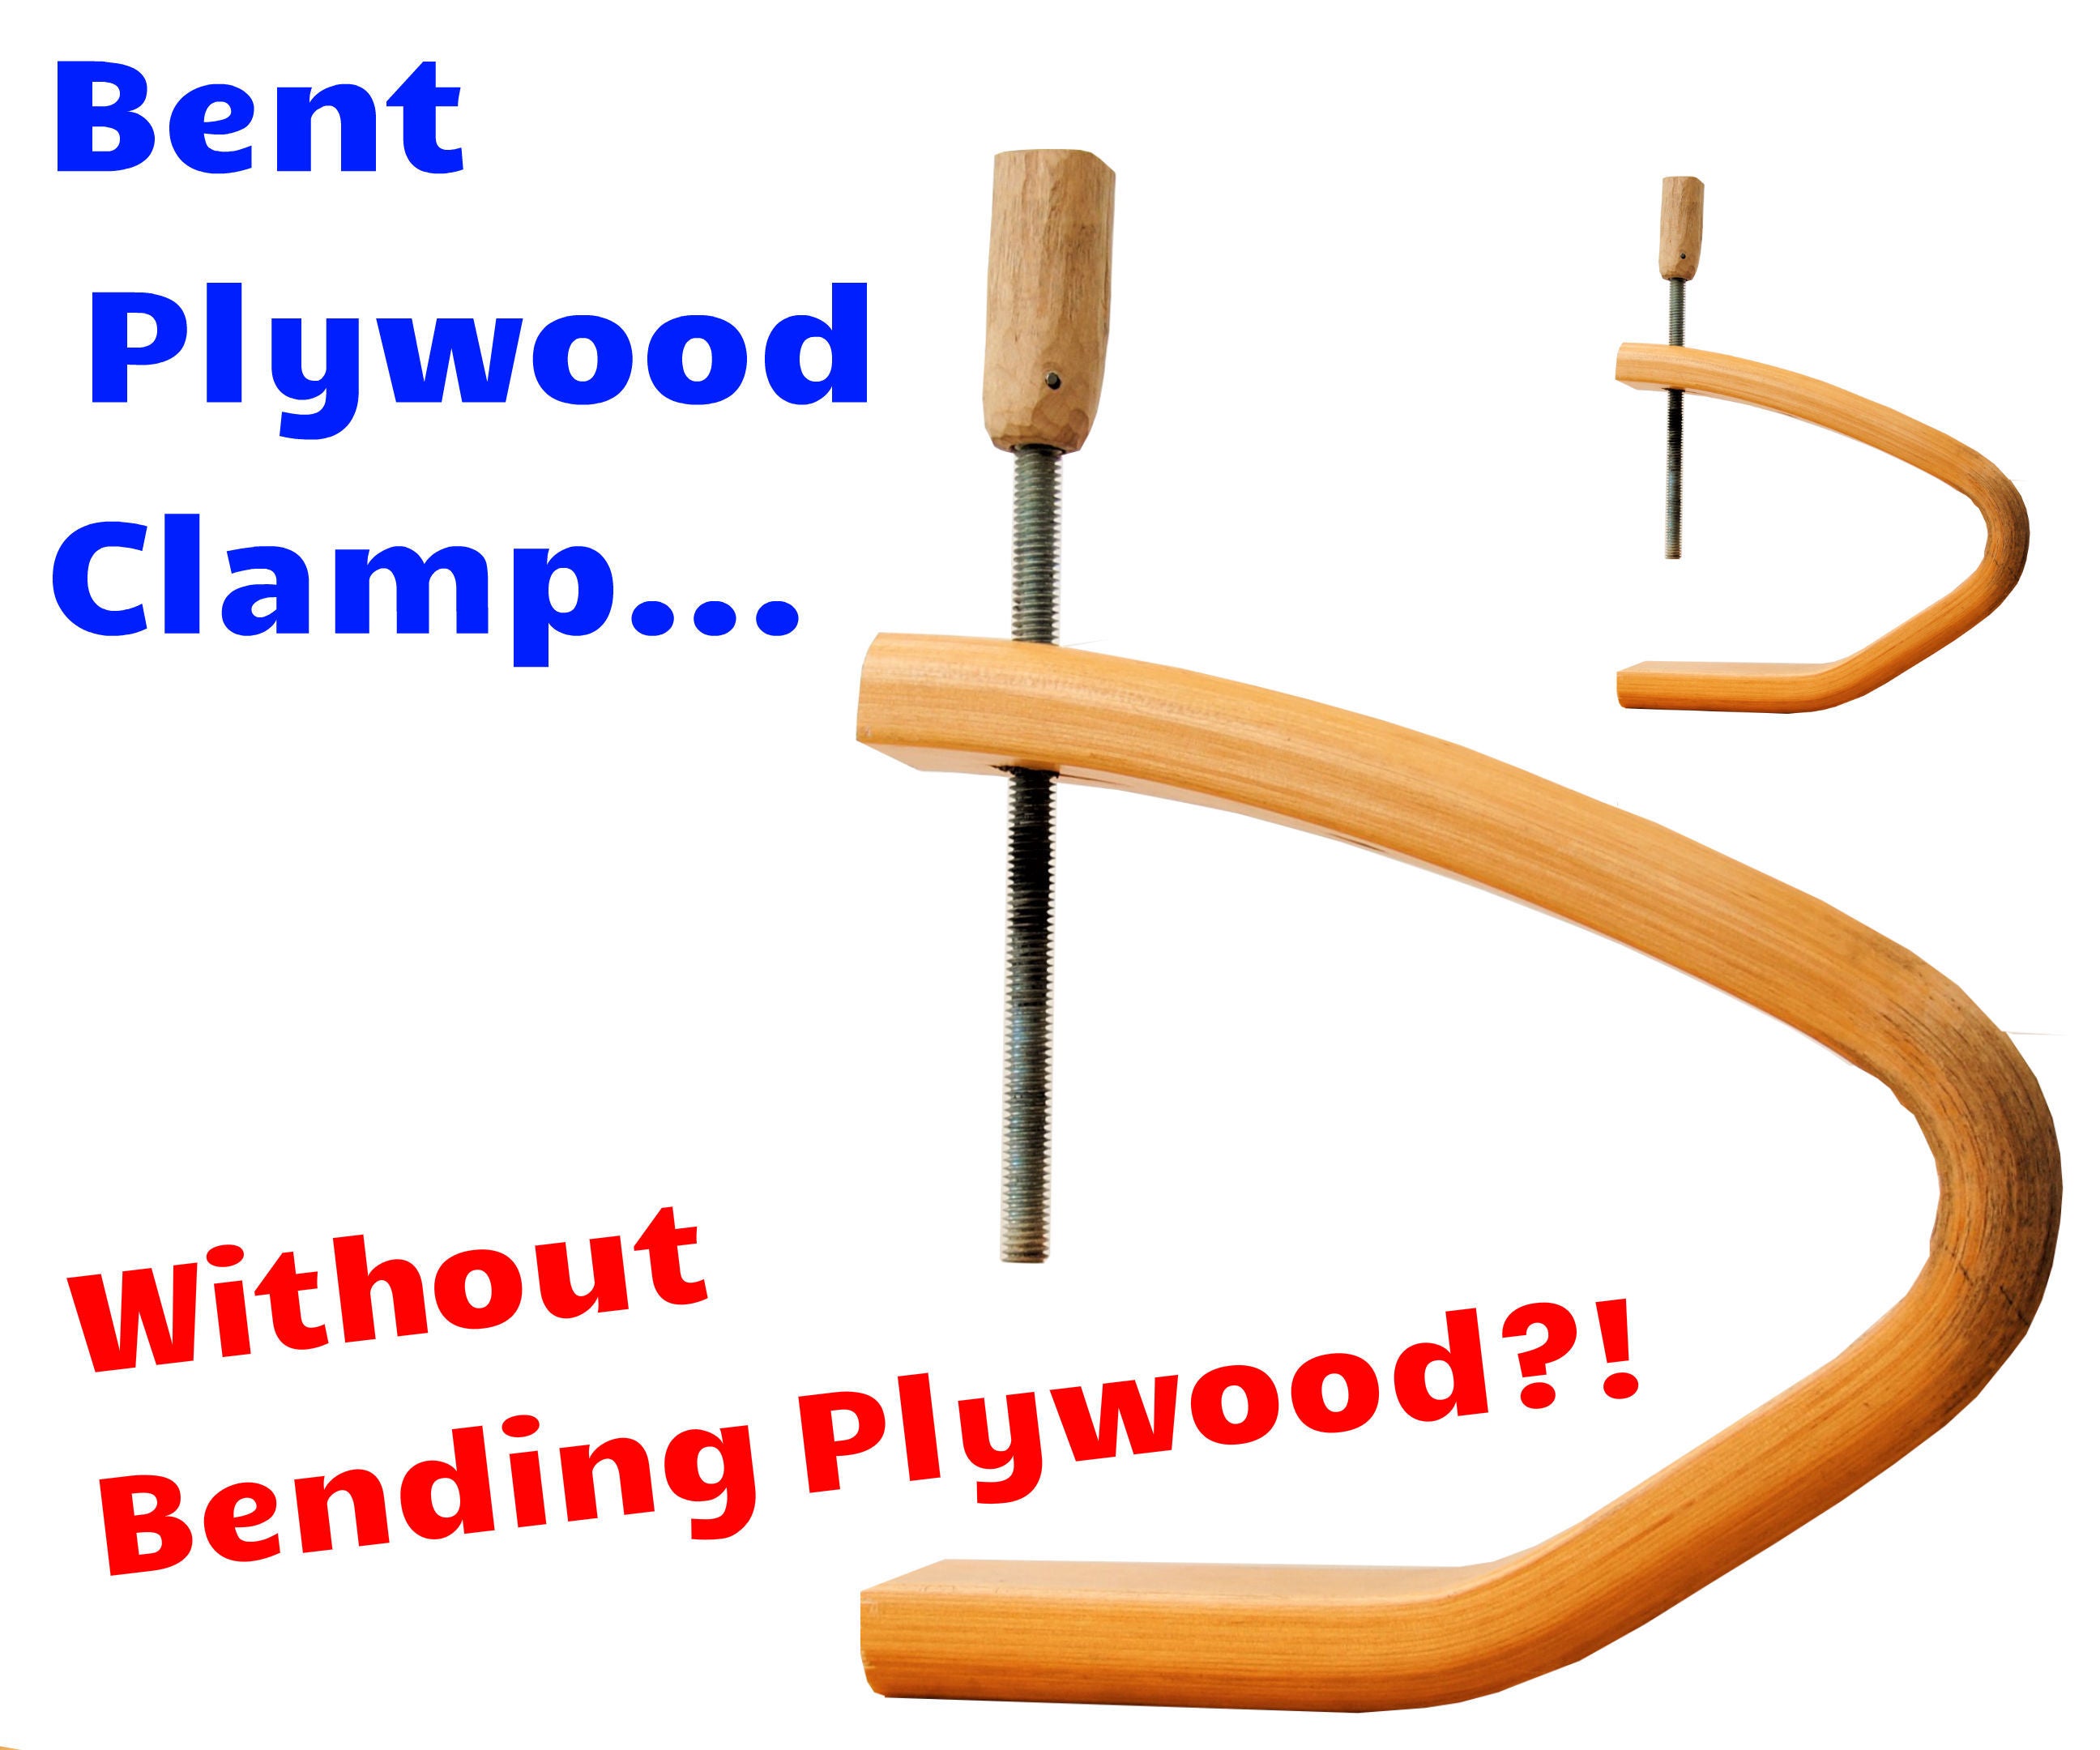 DIY Bent Plywood Long Reach C-Clamps Without Bending Plywood! (Broken Sofa to Clamp!)